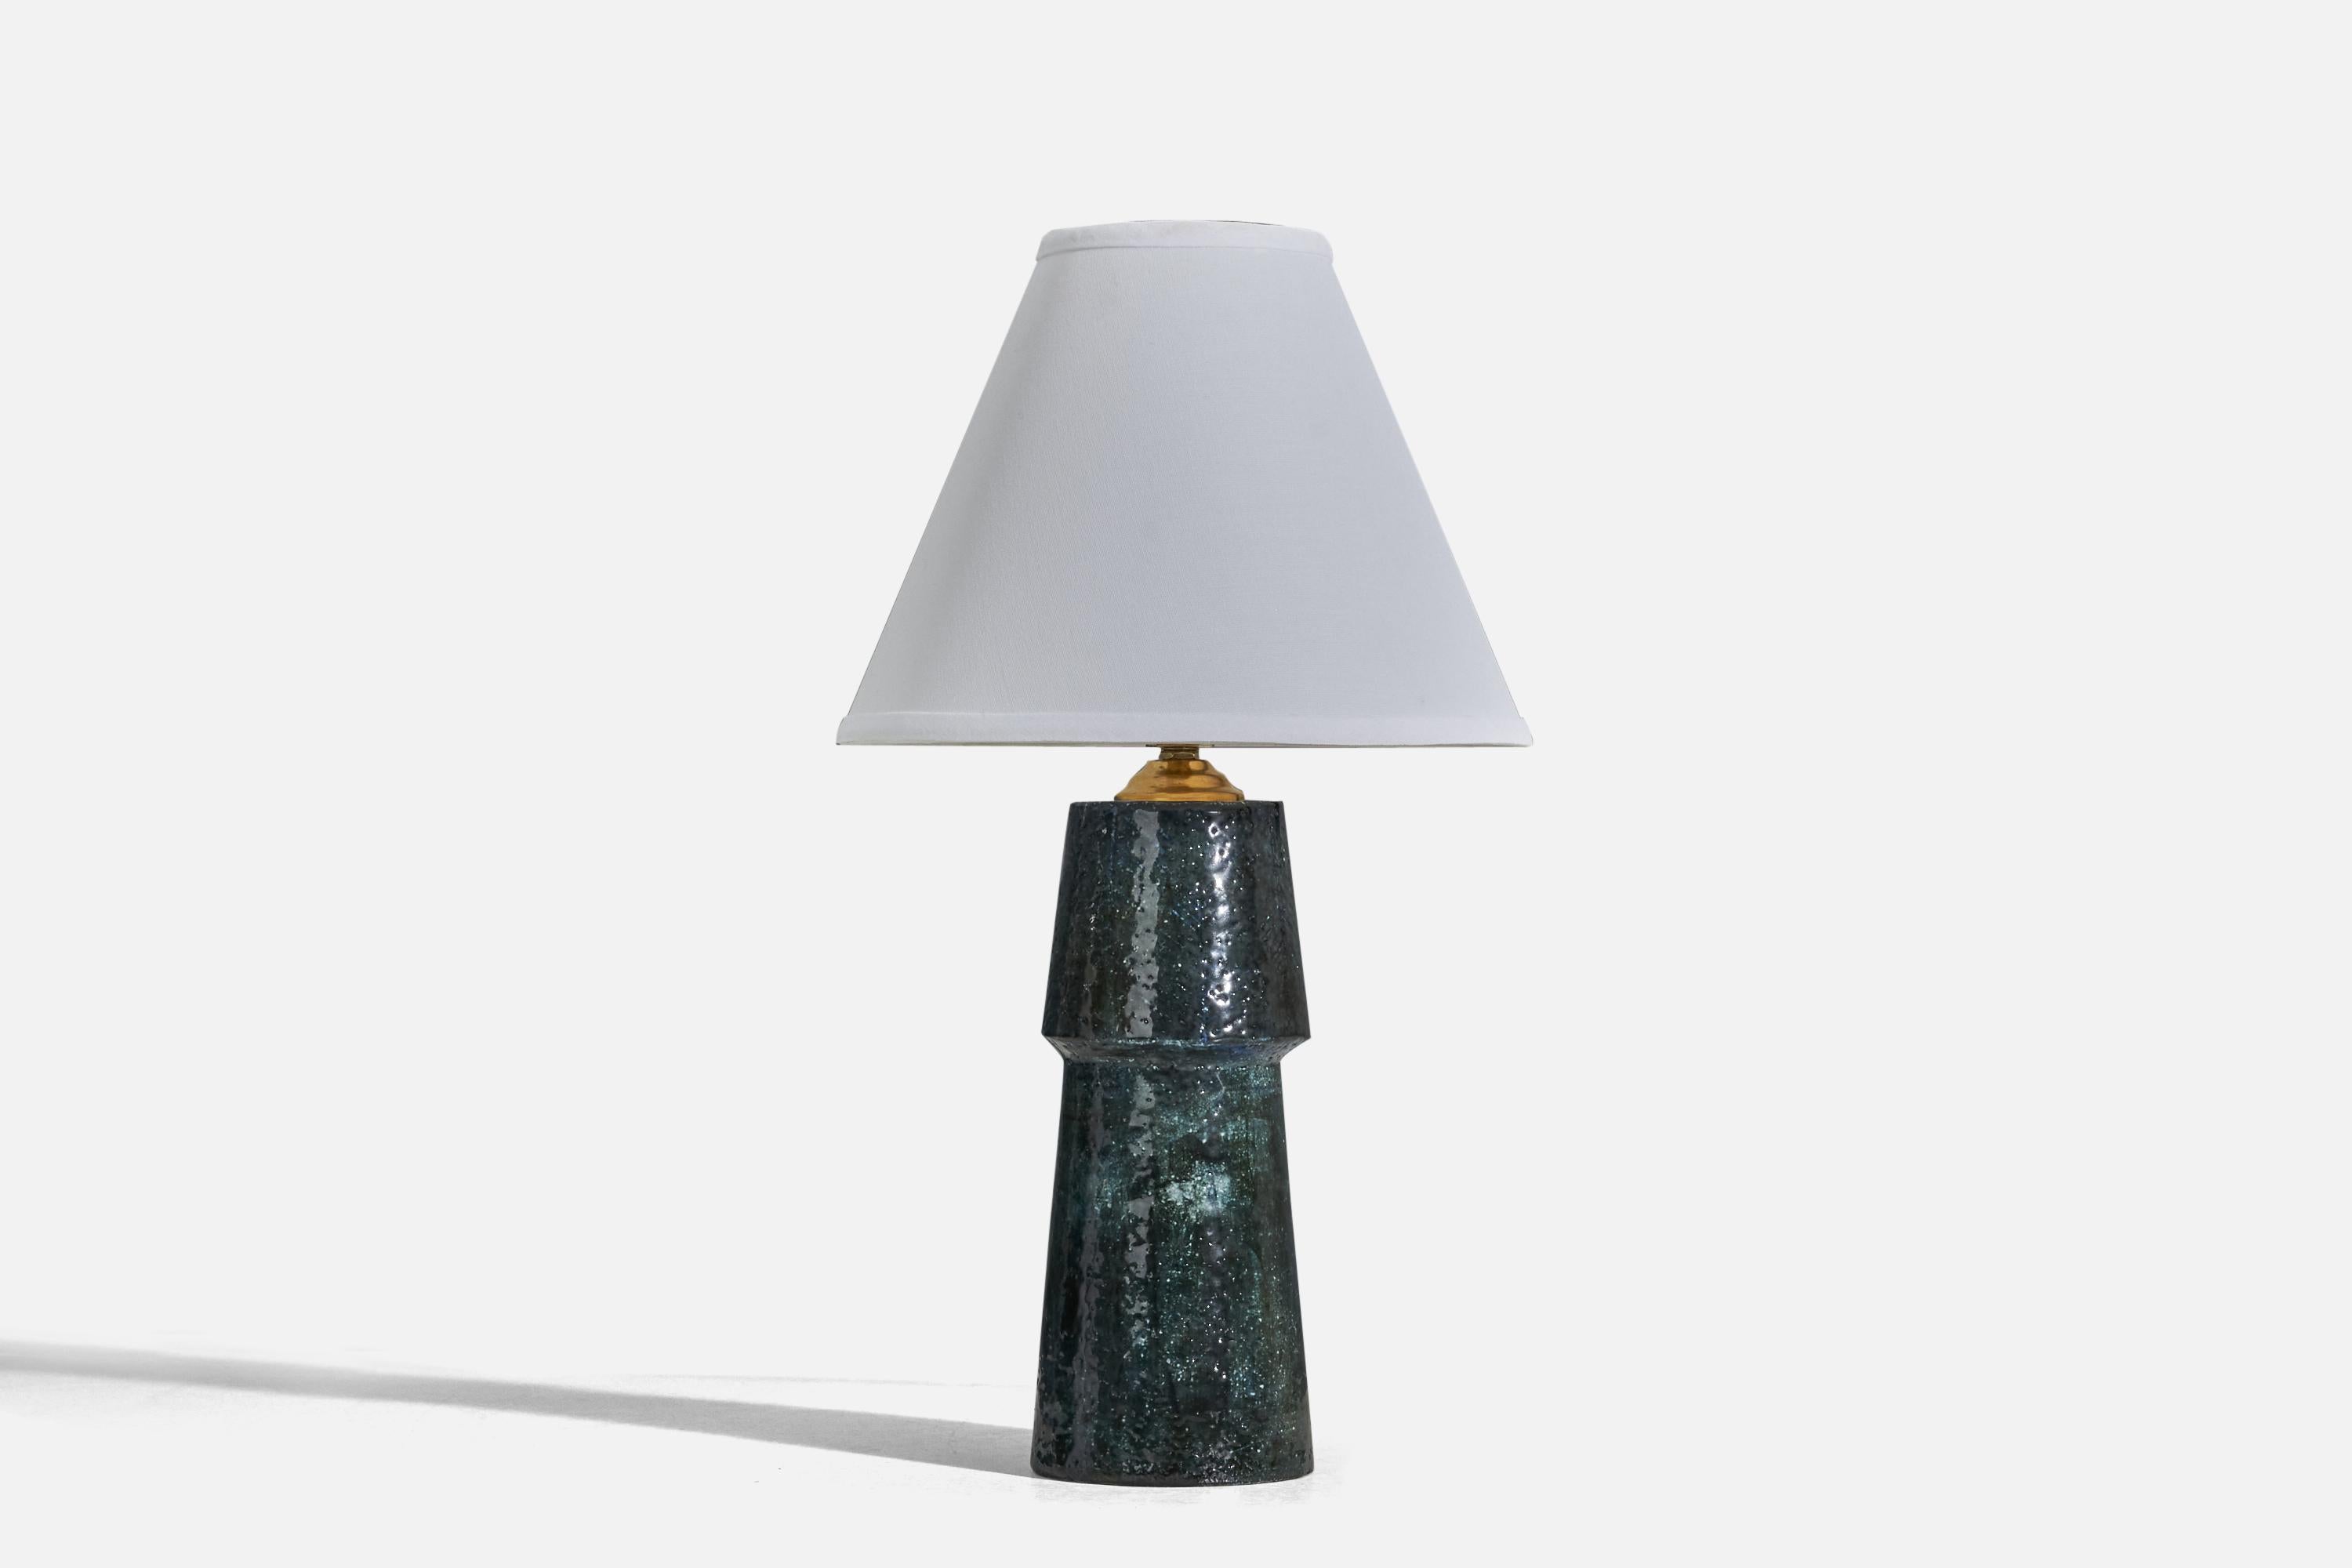 A blue glazed stoneware and brass table lamp designed by Sylvia Leuchovius and produced by Rörstrand, Sweden, 1960s.

Sold without Lampshade
Dimensions of Lamp (inches) : 13.25 x 4.10 x 4.10 (Height x Width x Depth)
Dimensions of Lampshade